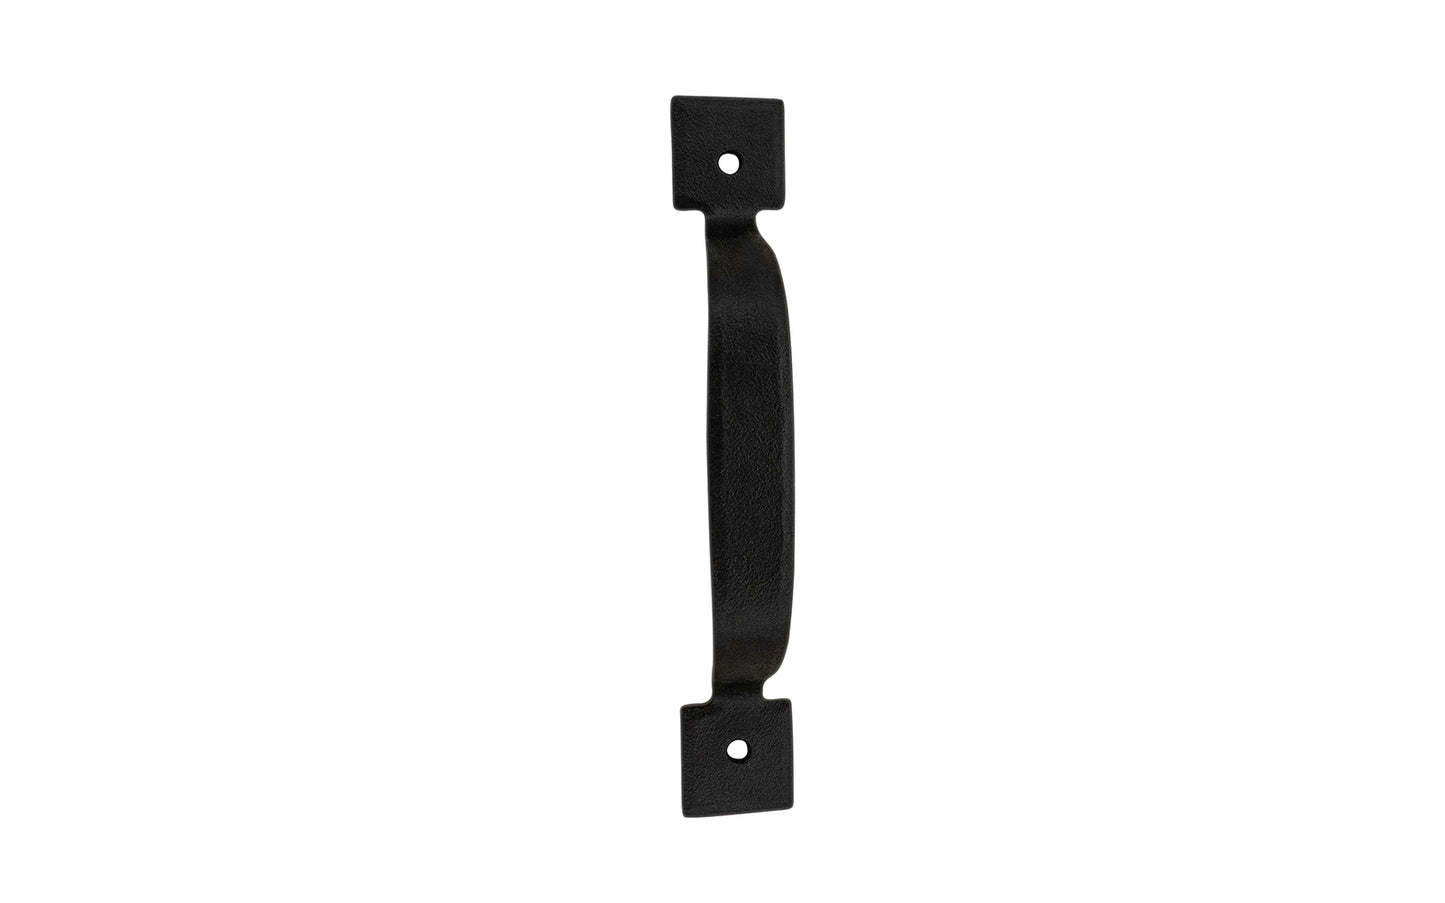 A hand-forged cabinet pull handle with square ends. Made of steel material with a black finish, it has a nice durable & strong feel. This traditional piece of hardware is great for cabinets, furniture, drawers, & small doors. Powder coated to resist rust. Model 88617 - Black Finish - Rustic Square end handle pull 